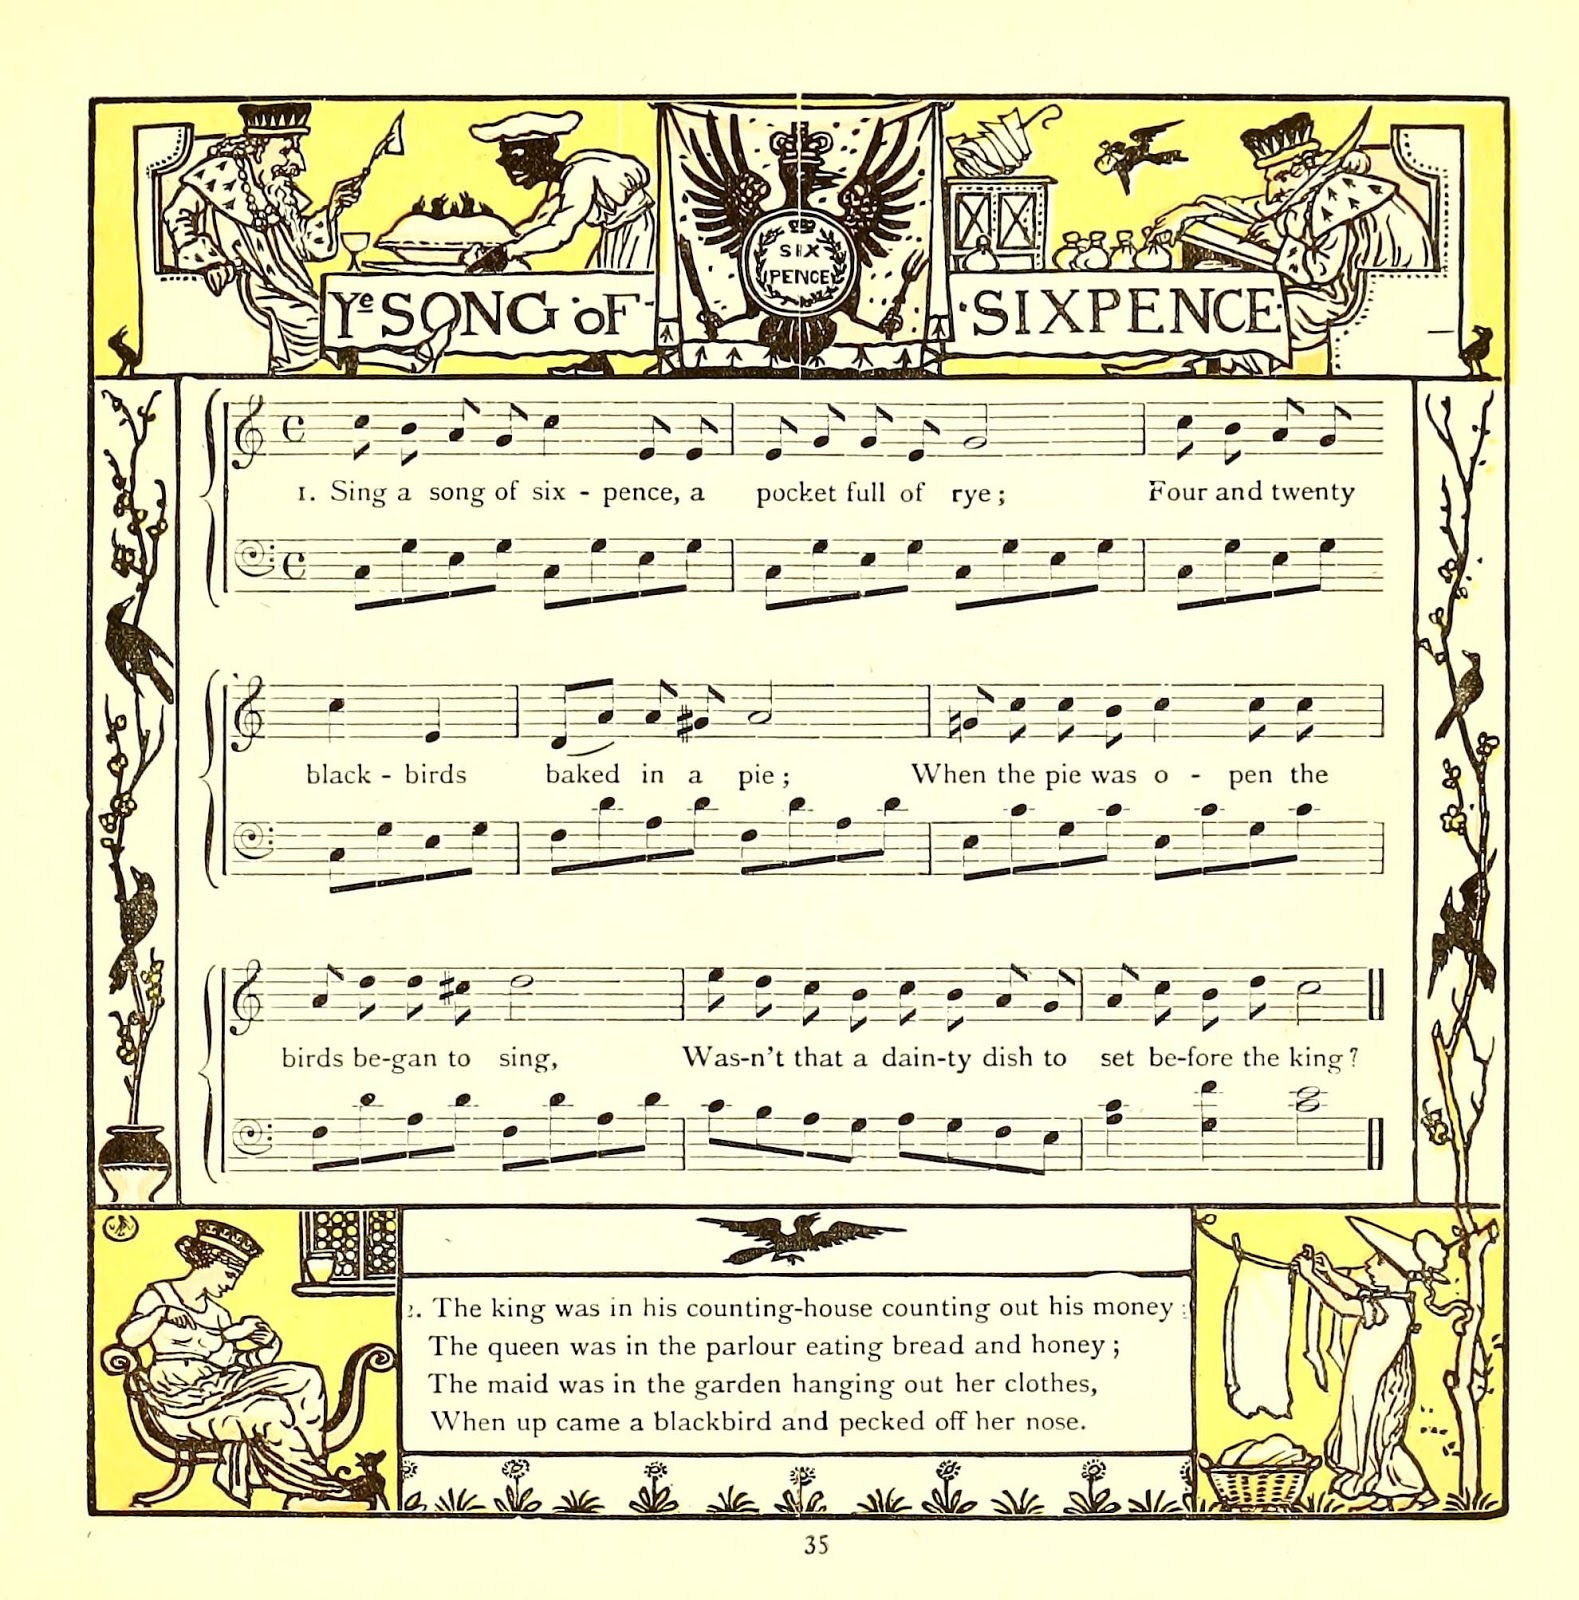 Singing a song перевод. Sing a Song of Sixpence. Sing a Song of Sixpence a Pocket Full of Rye. Sing a Song of Song Ноты. Sing a Song of Sixpence перевод.